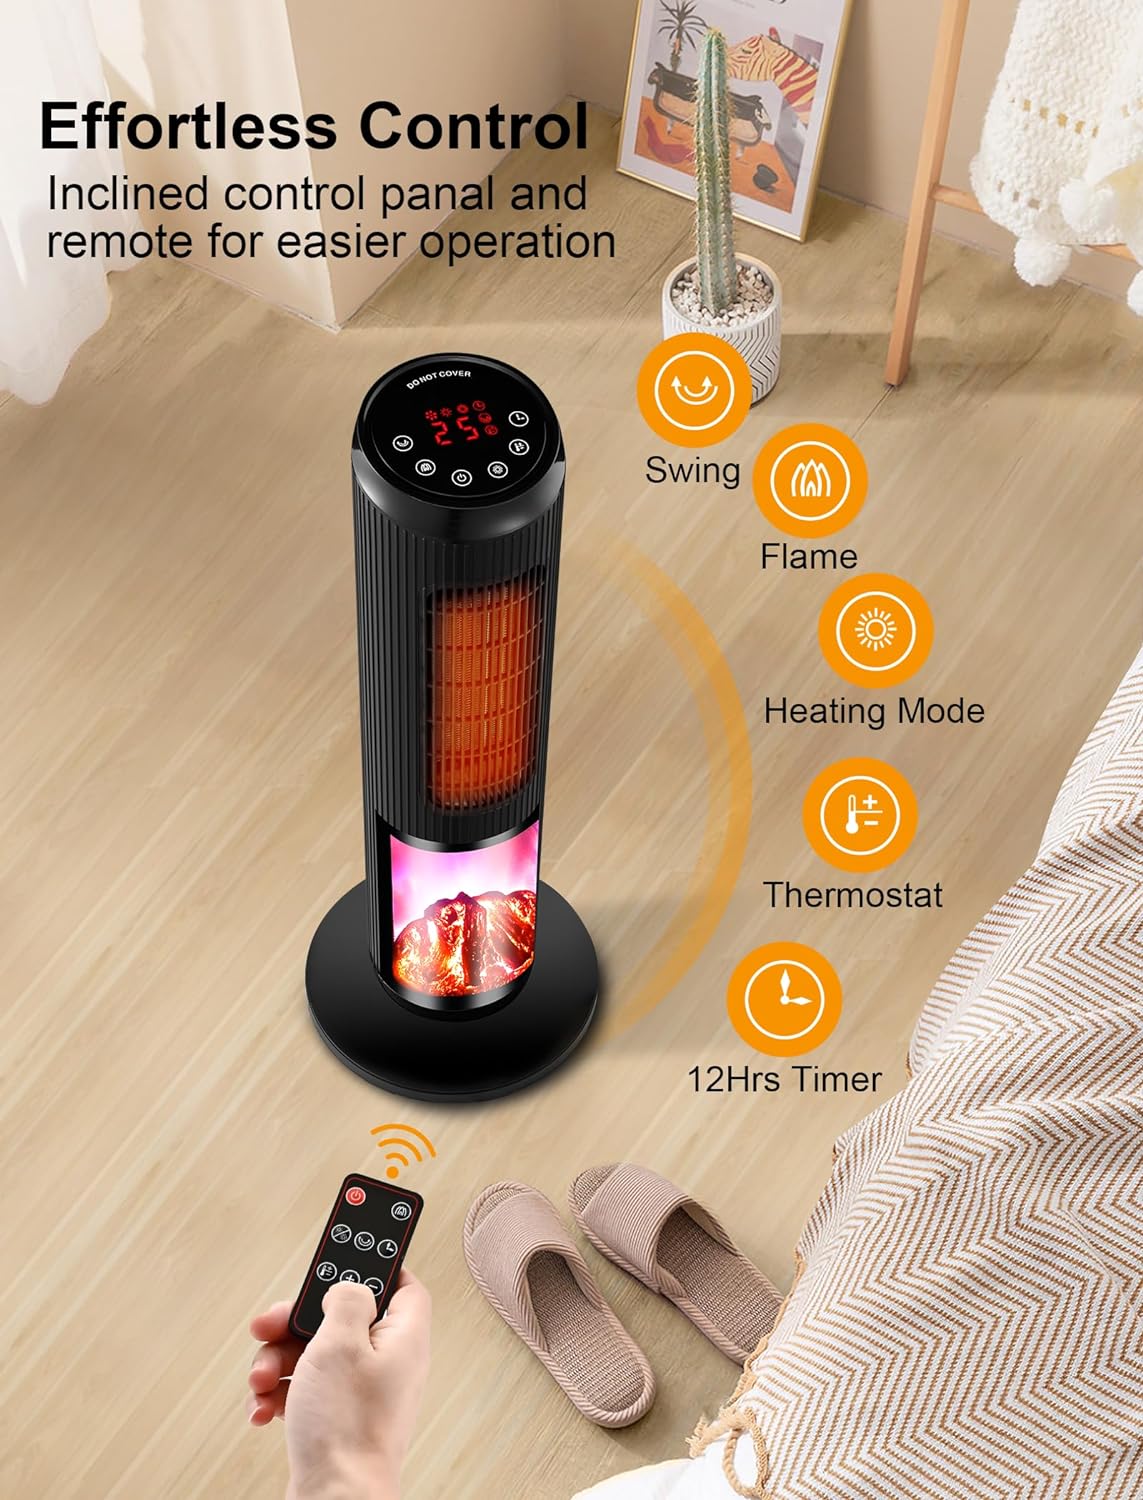 TRUSTECH 25" 1500W Portable electric Tower Heater with Remote